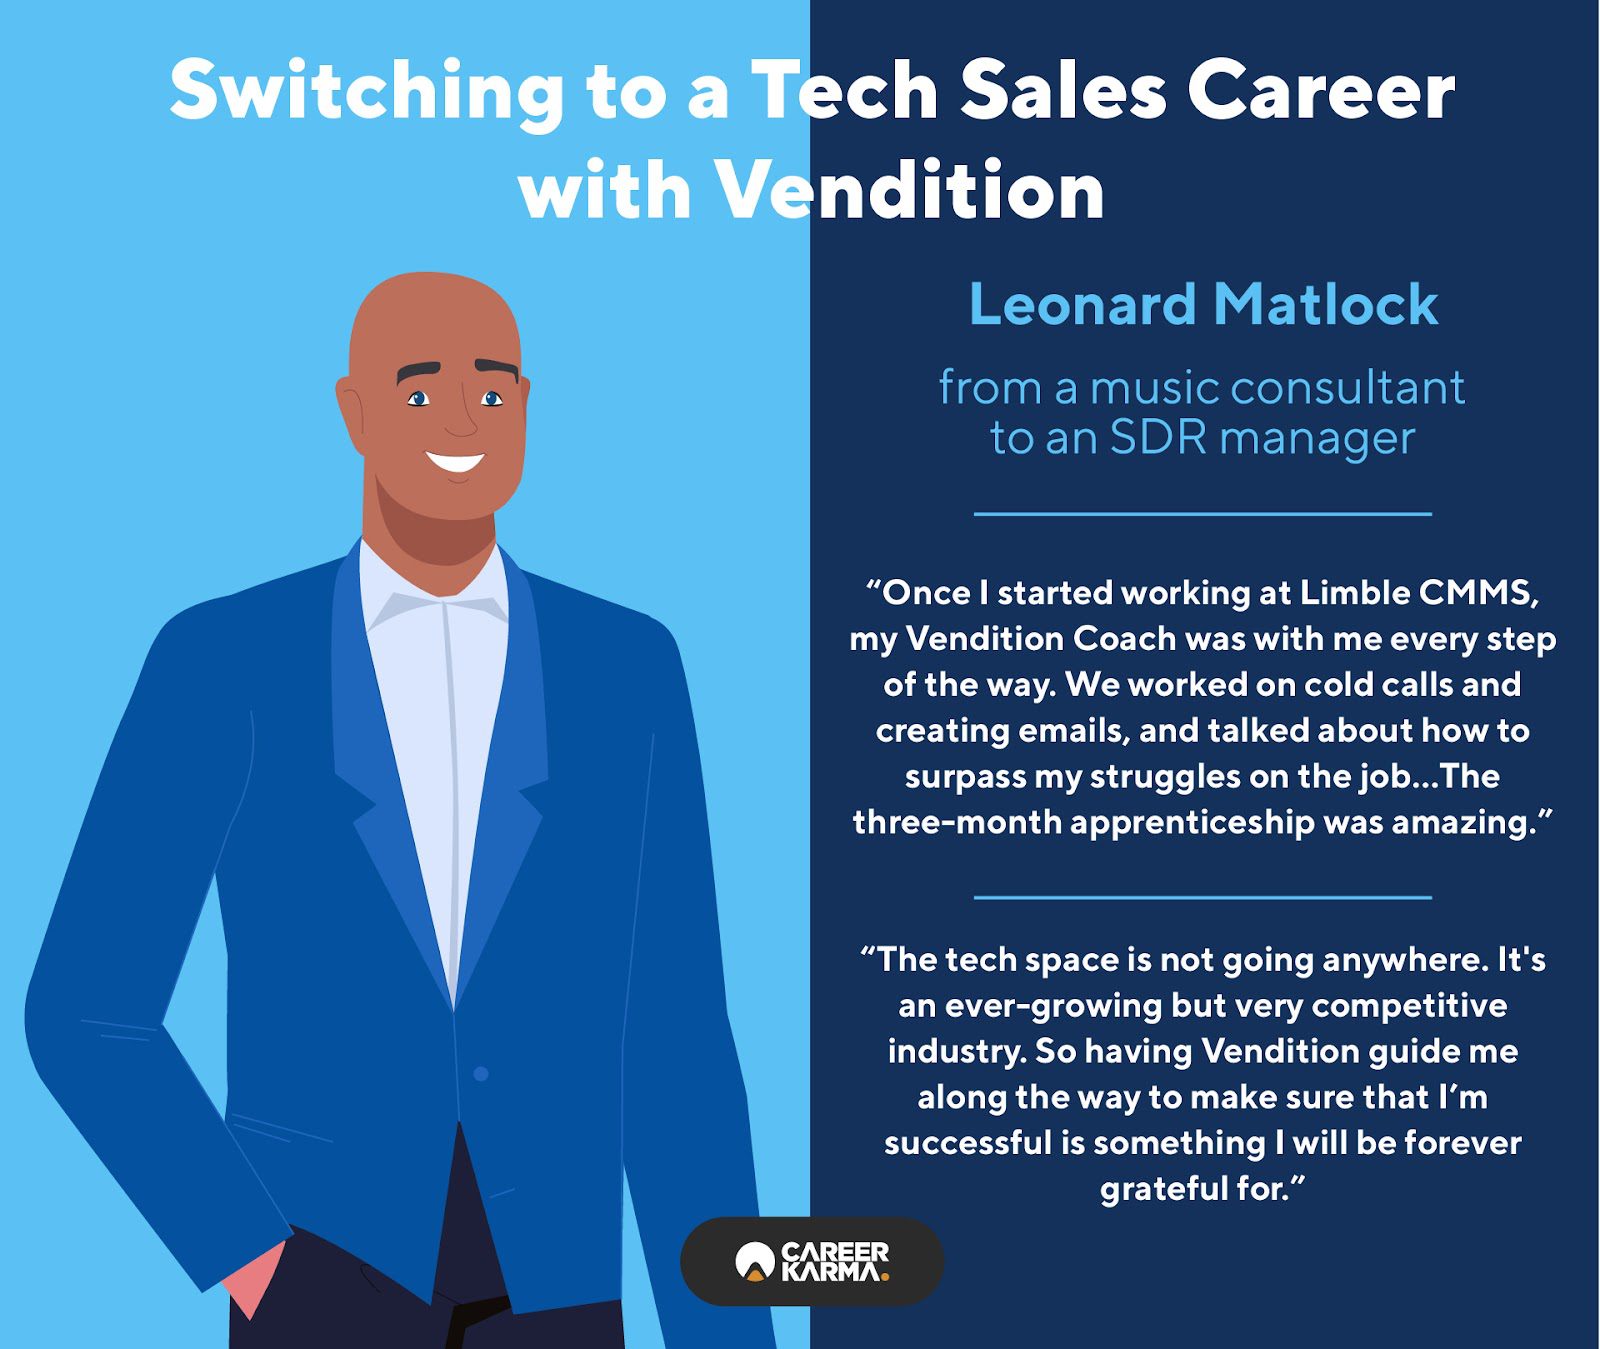 An infographic featuring Leonard Matlock’s review of Vendition